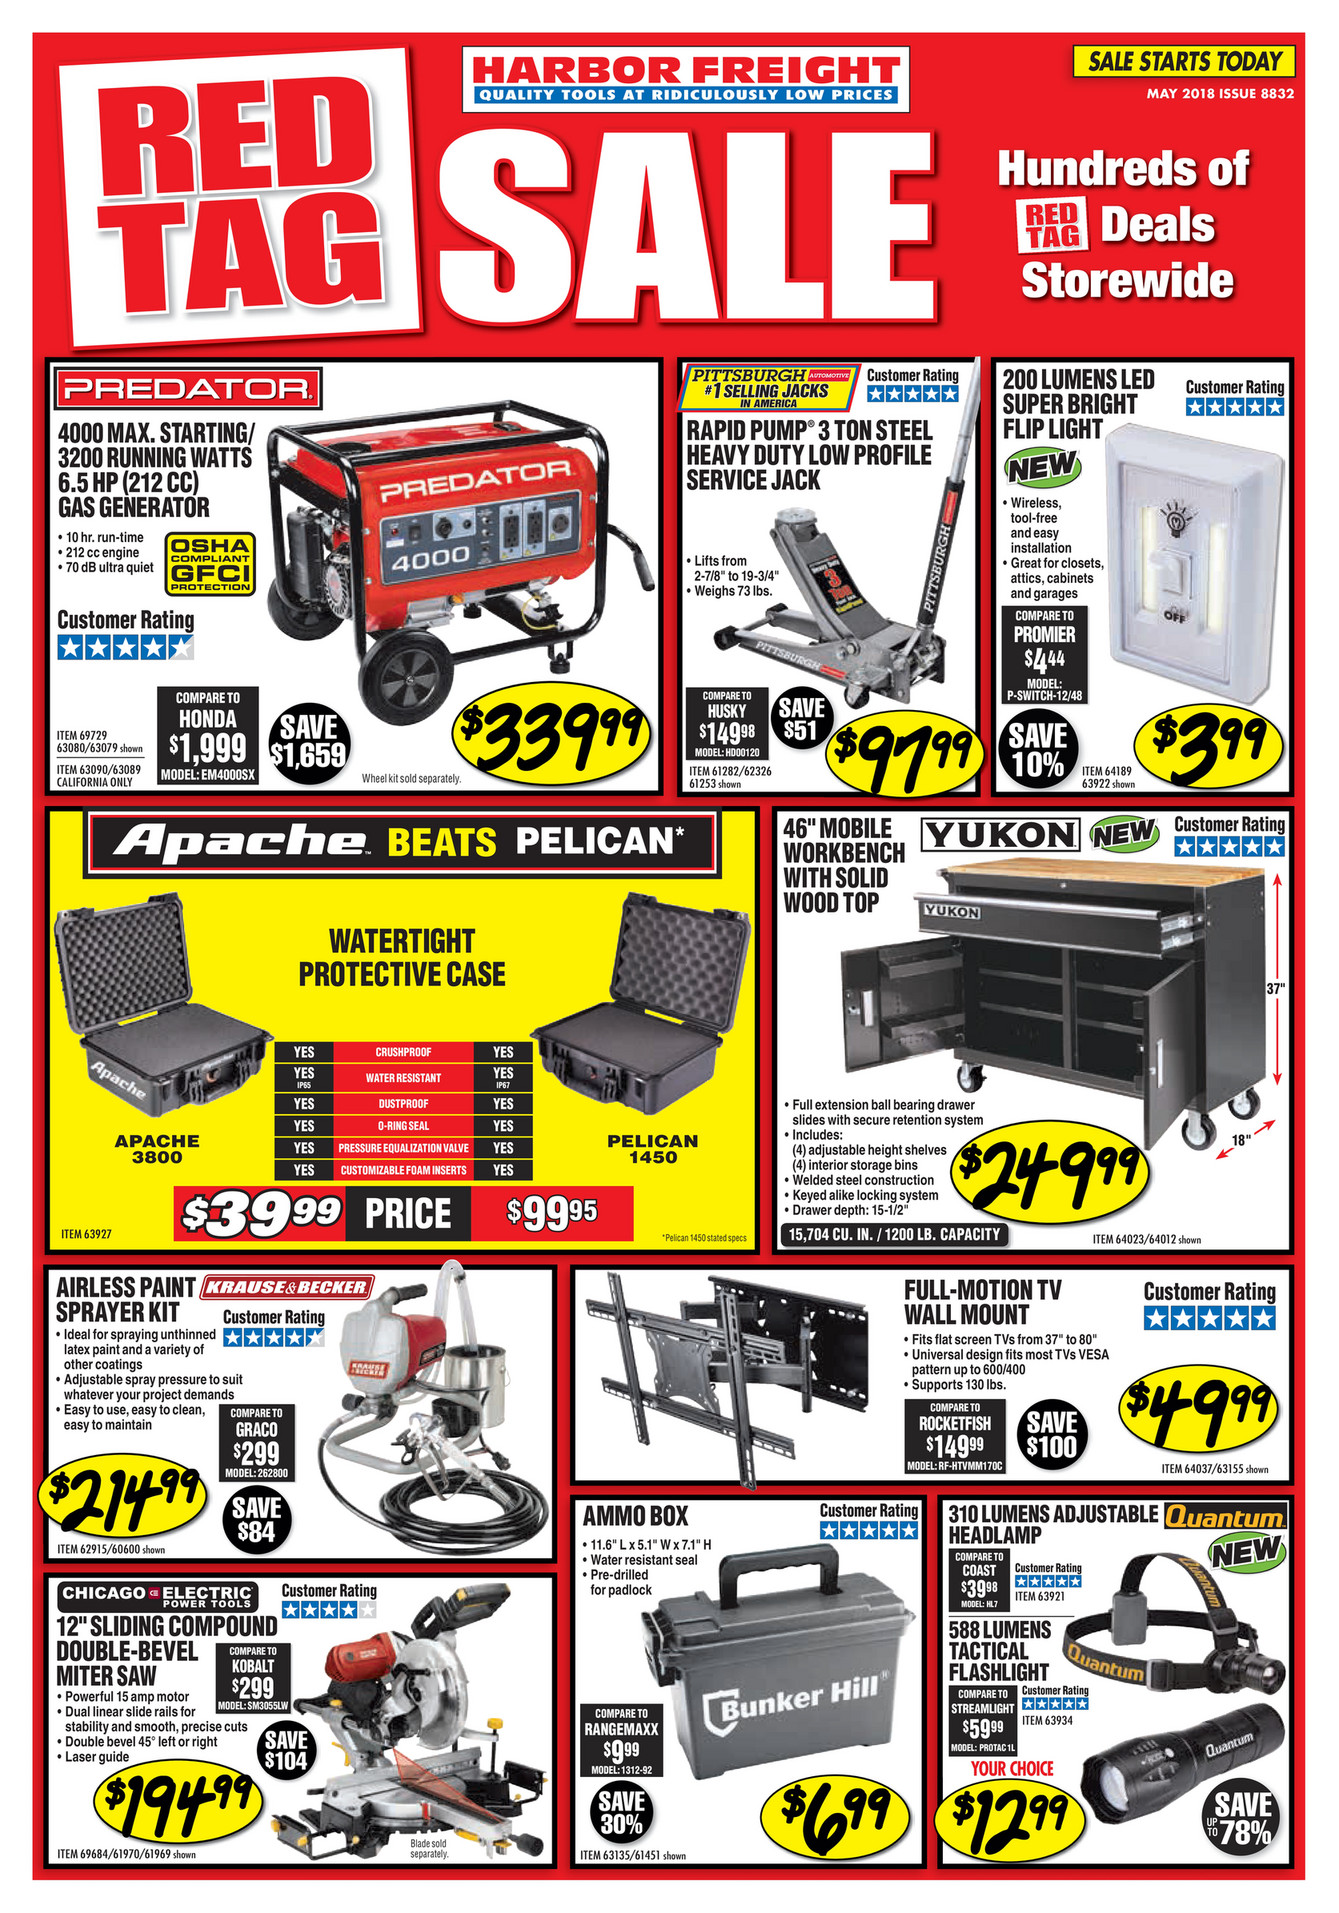 Harbor Freight Tools - May 2018 Ad - Page 1